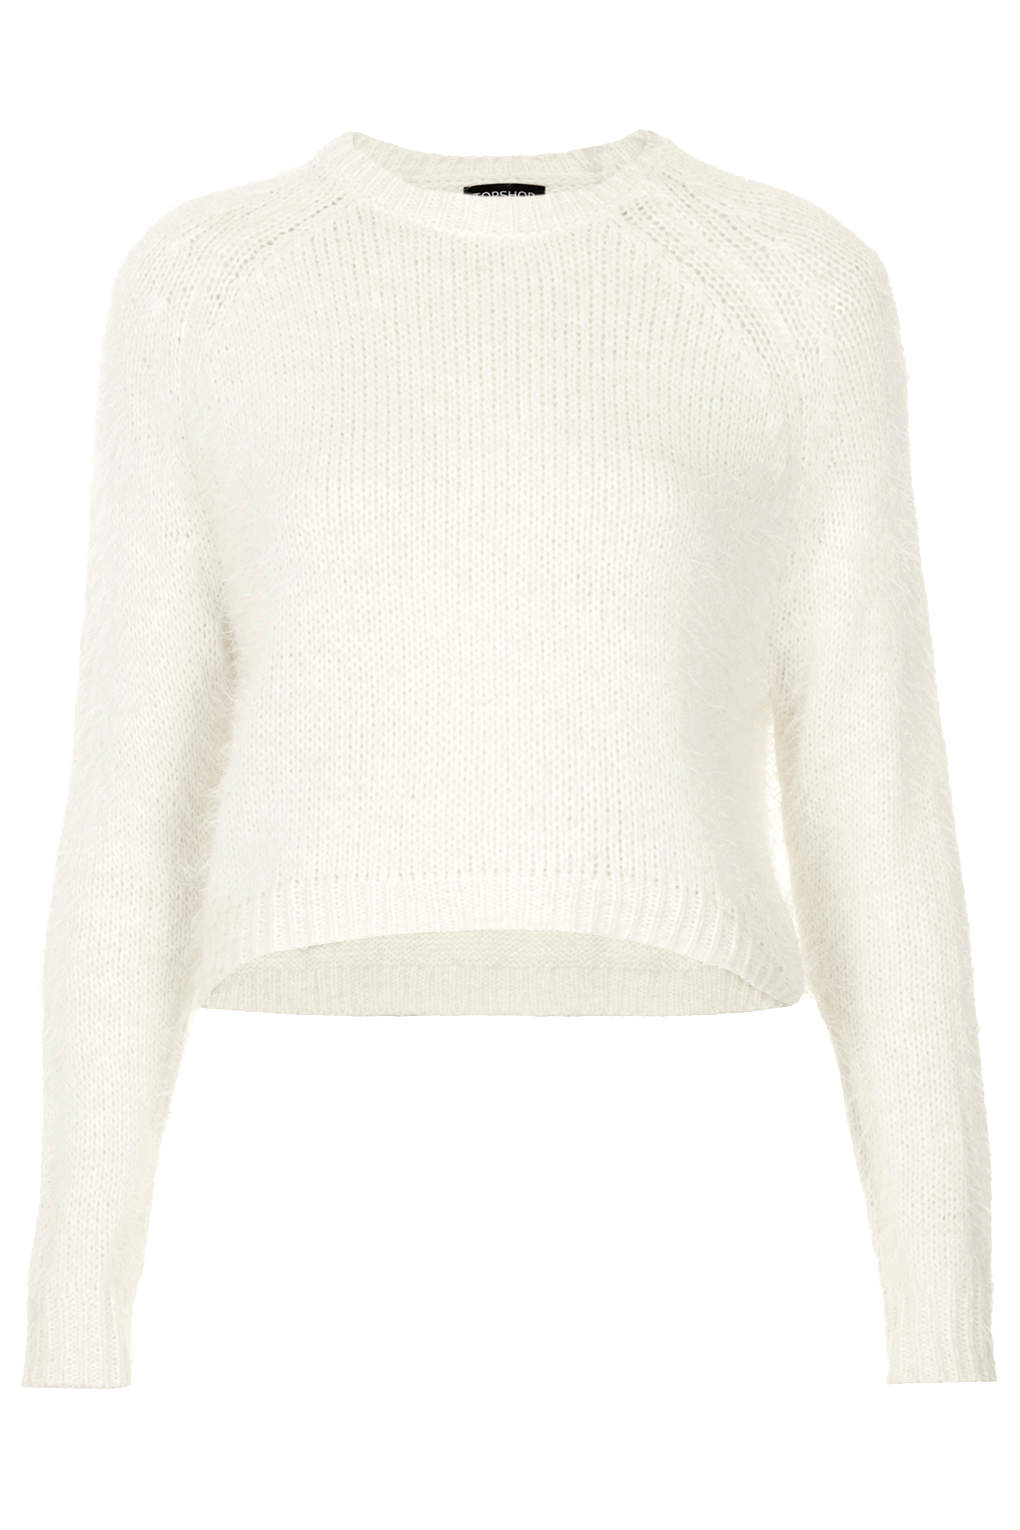 Topshop Knitted Fluffy Crop Jumper in White | Lyst